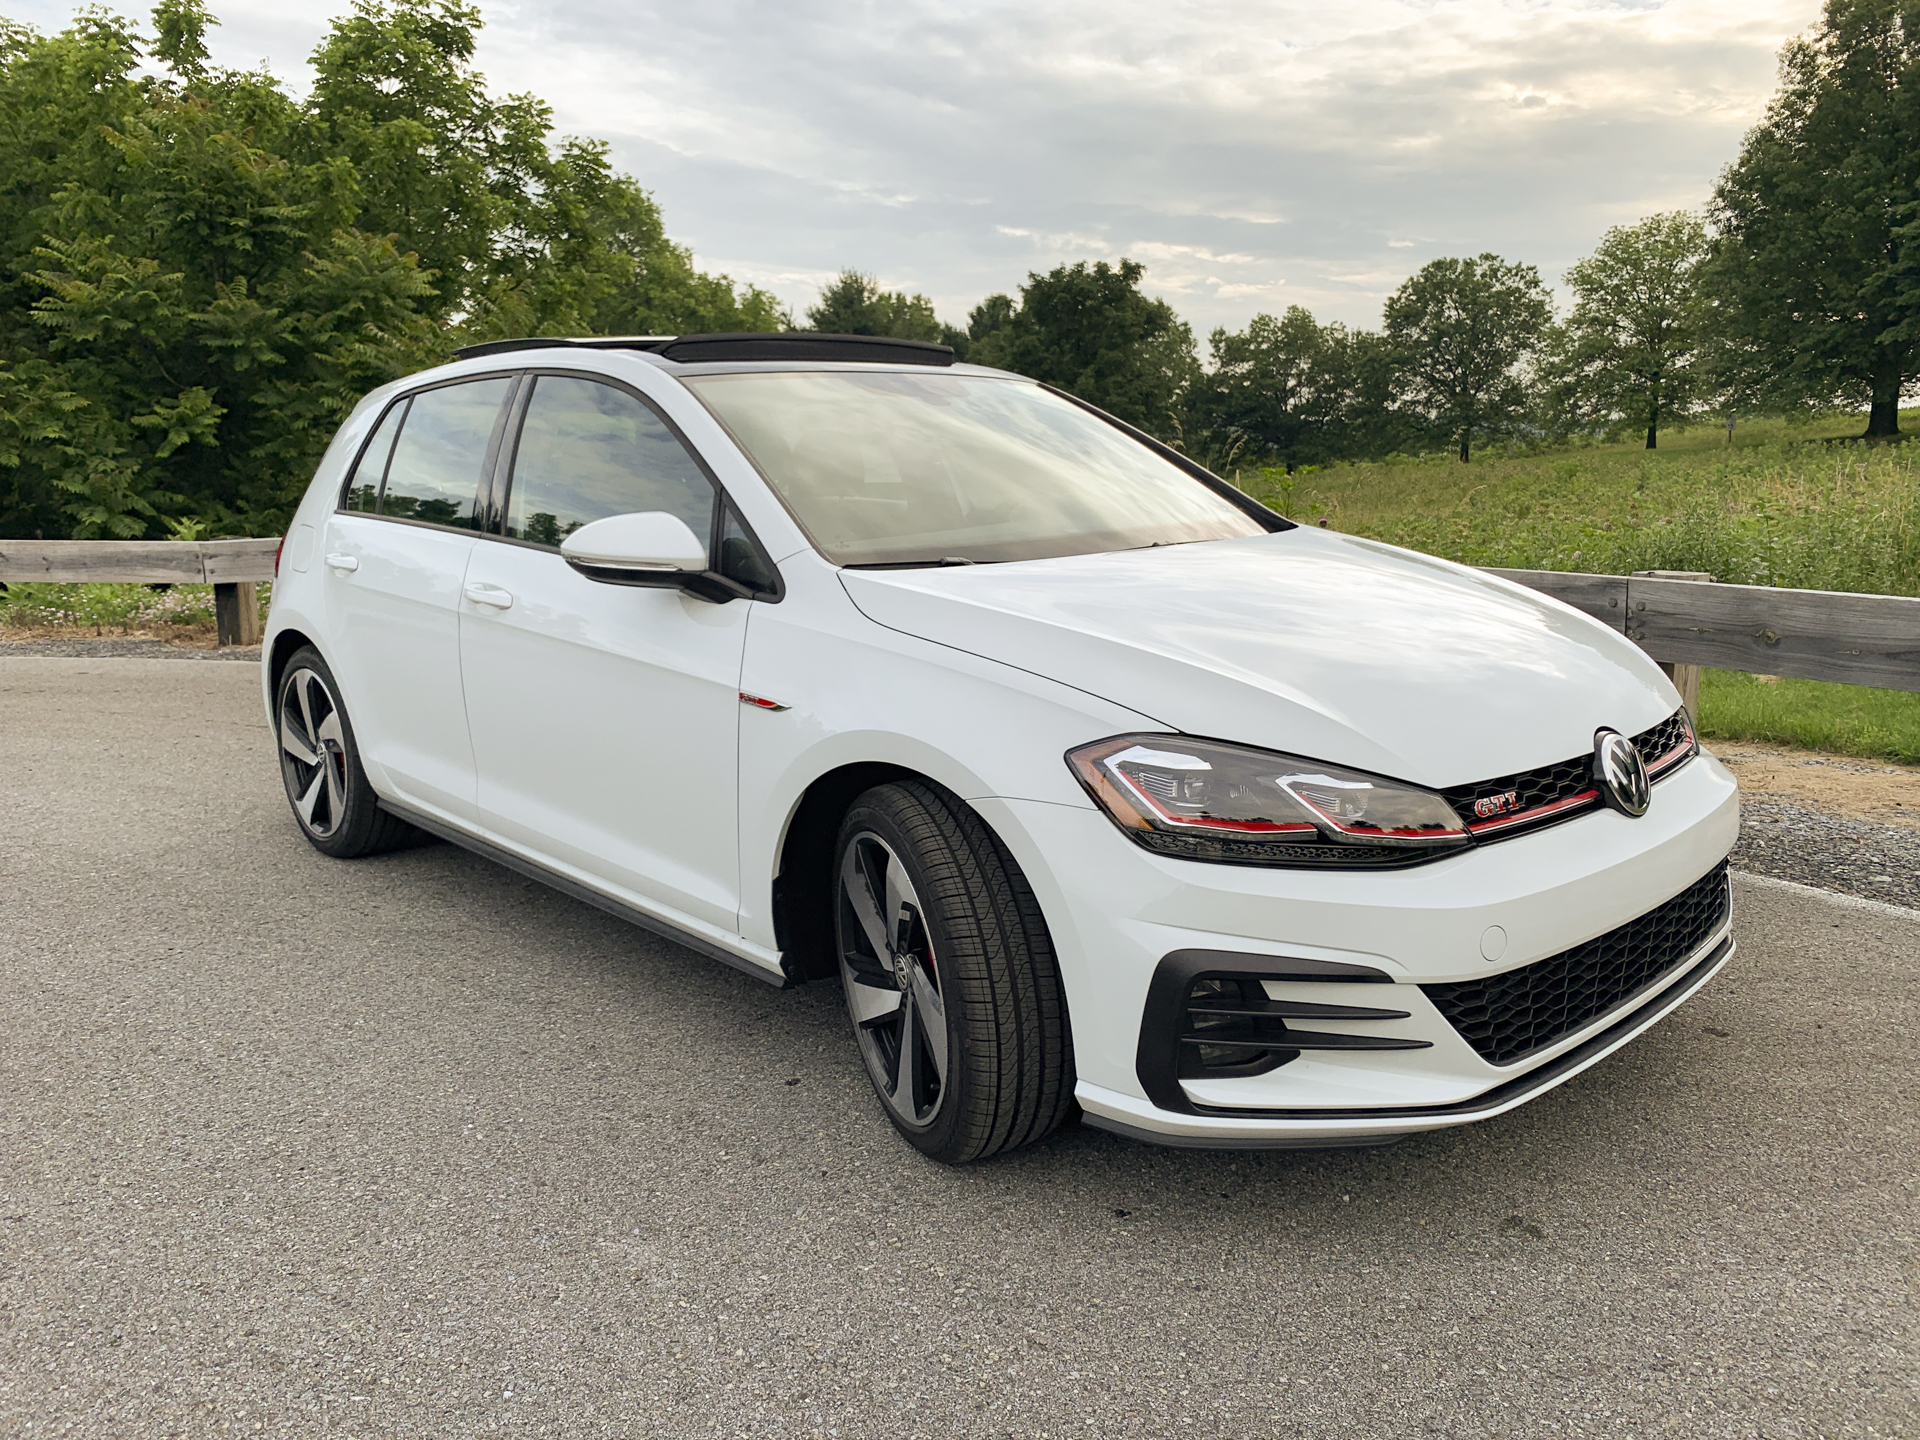 2019 Volkswagen Golf review: Fun on the cheap - CNET